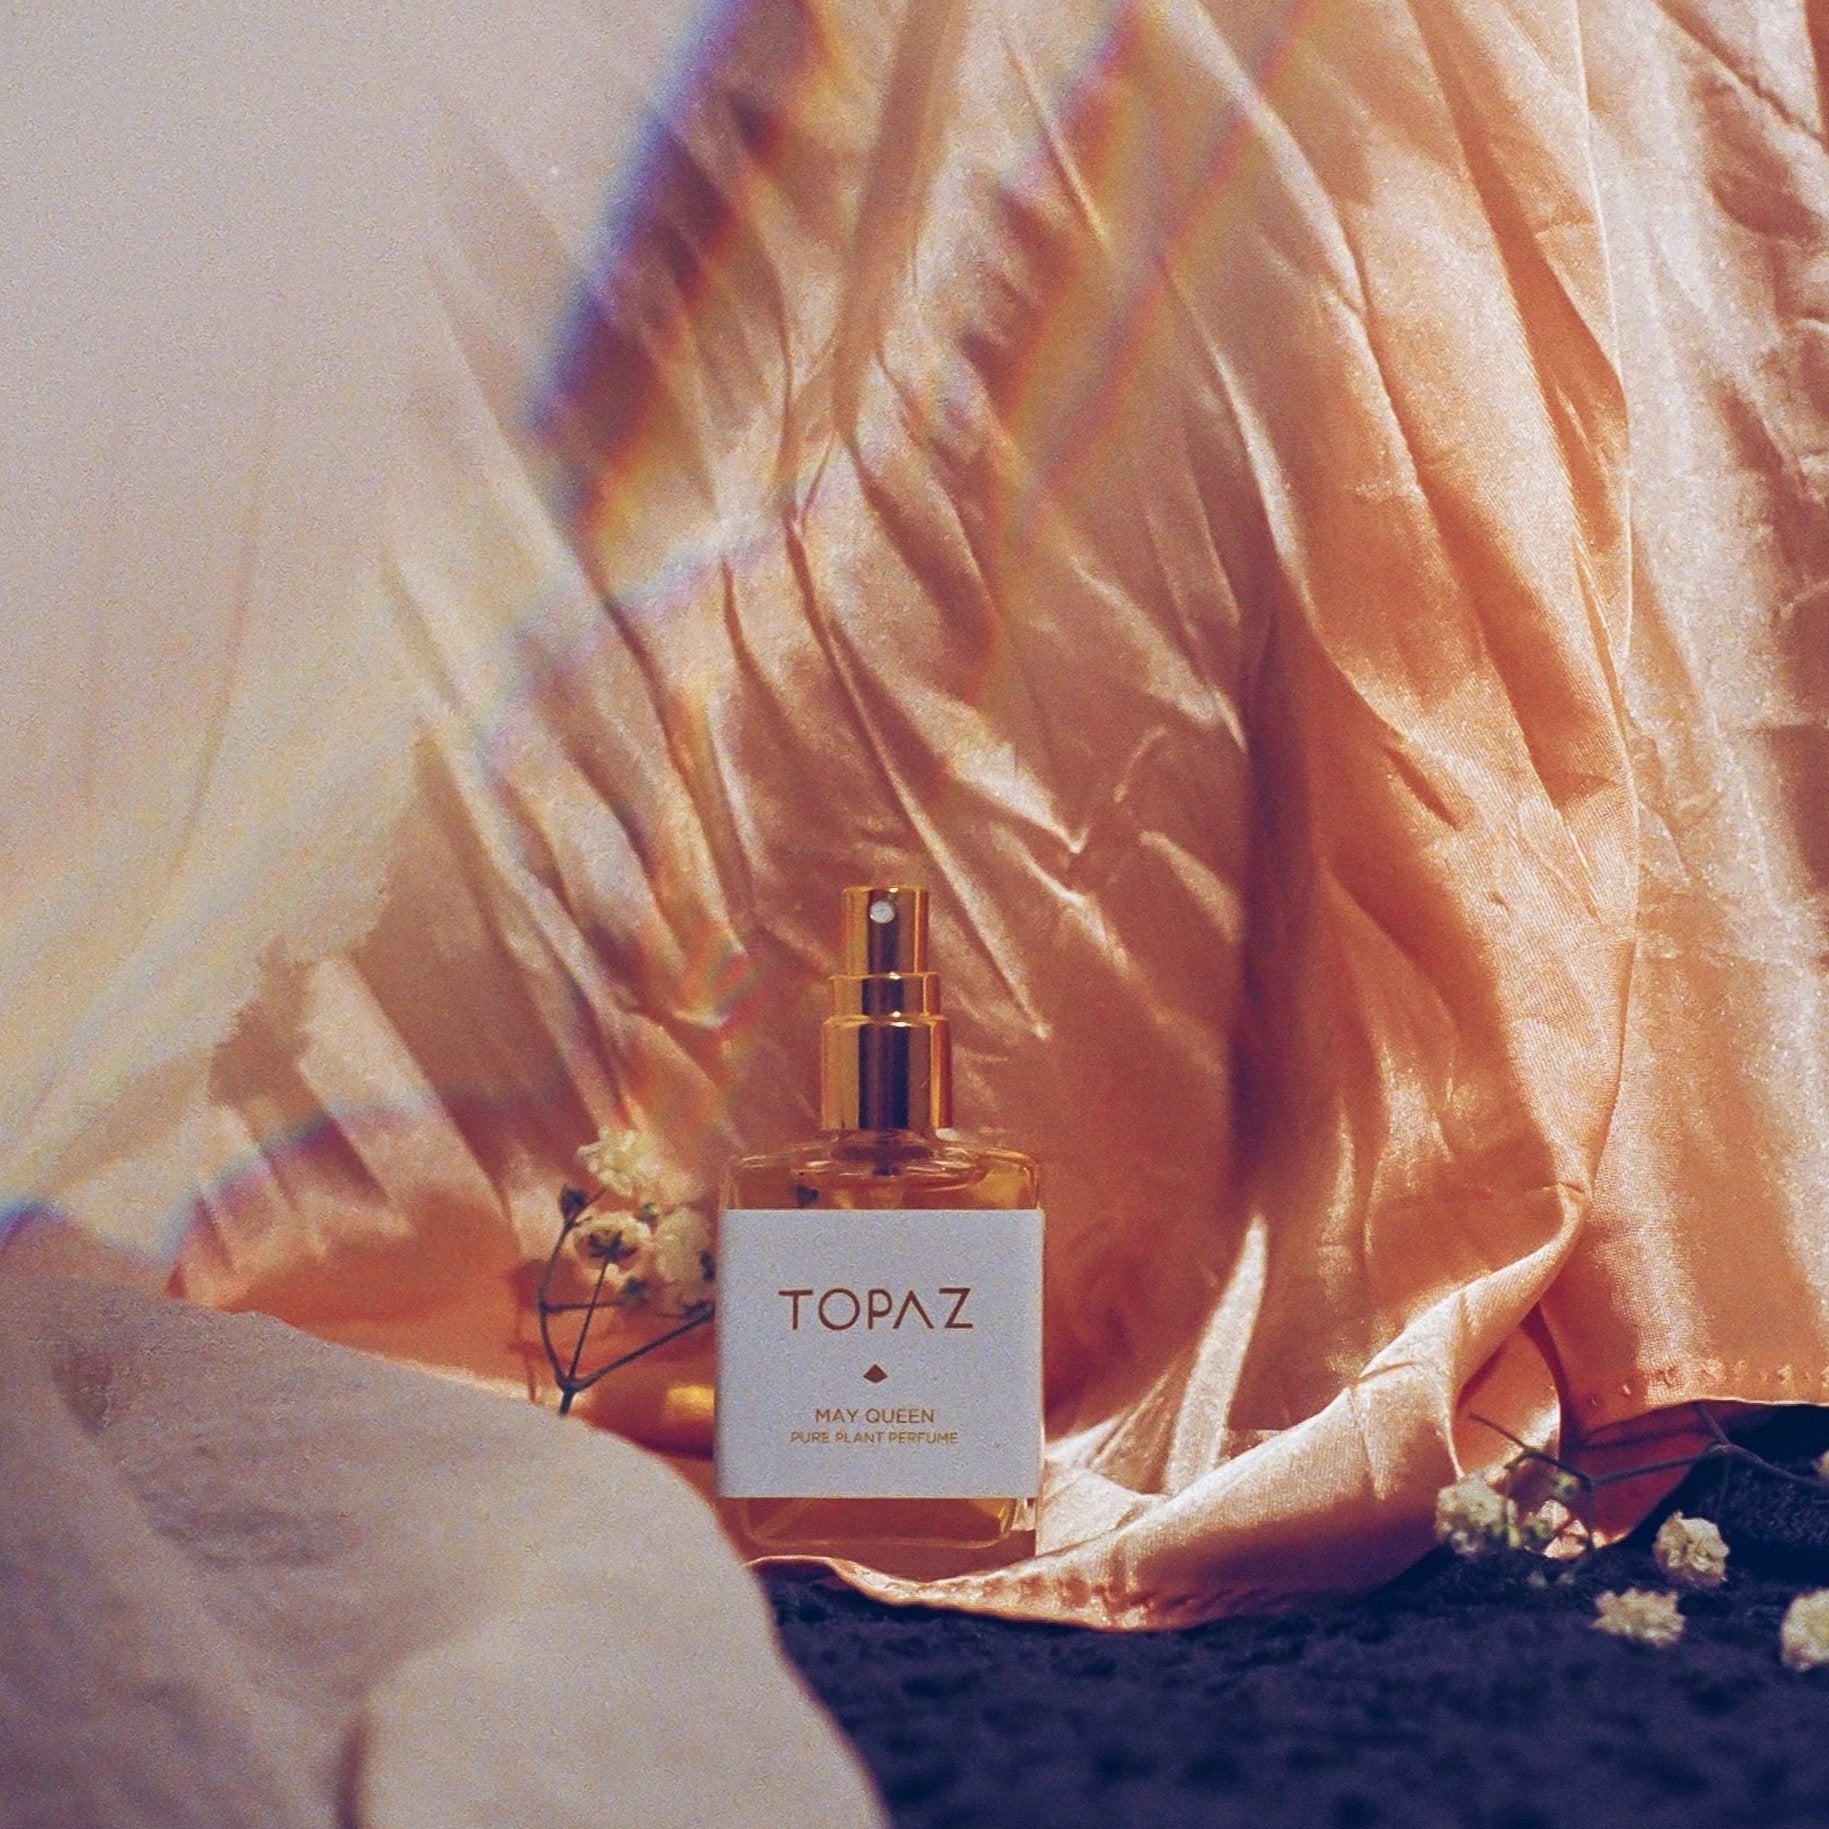 May Queen Natural Perfume